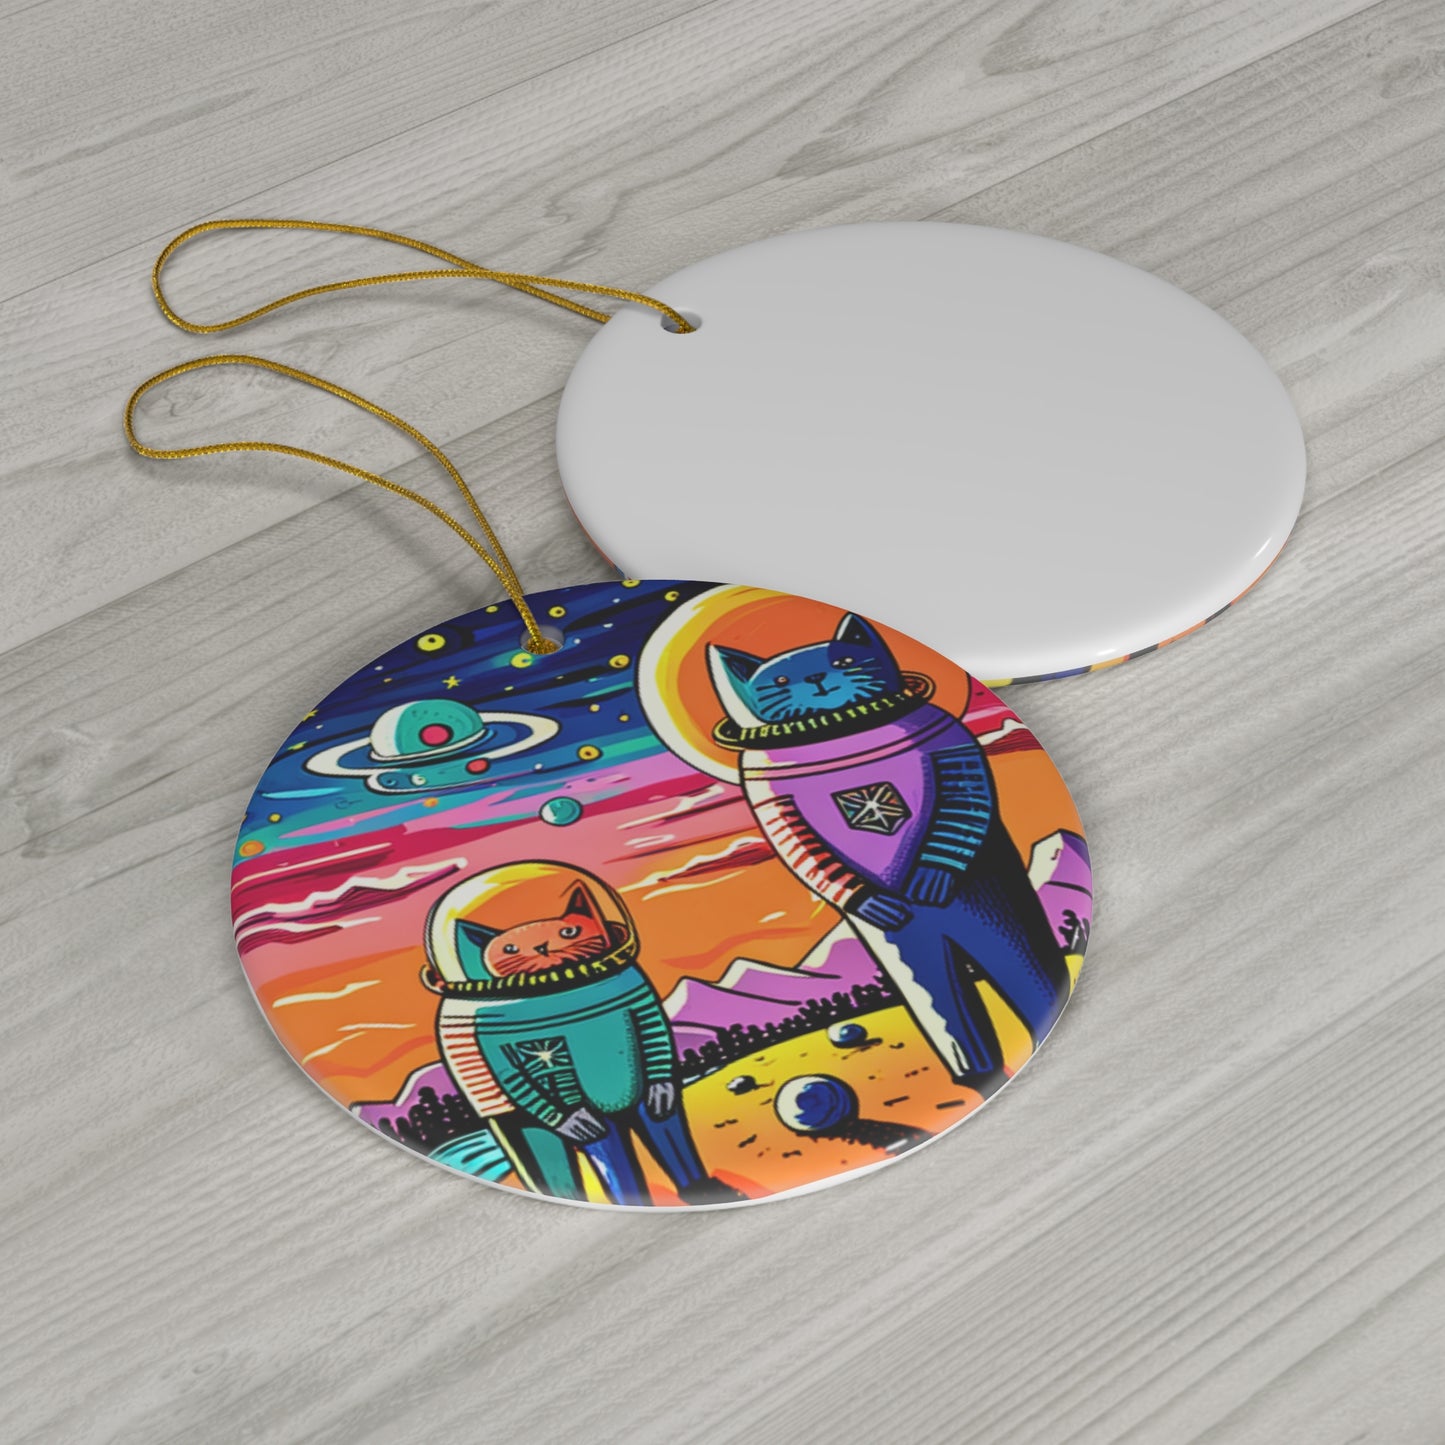 Sam and Rocky on Mars Expedition Spaceship Galaxy Outer Space Planets Astronaut  Ceramic Ornament